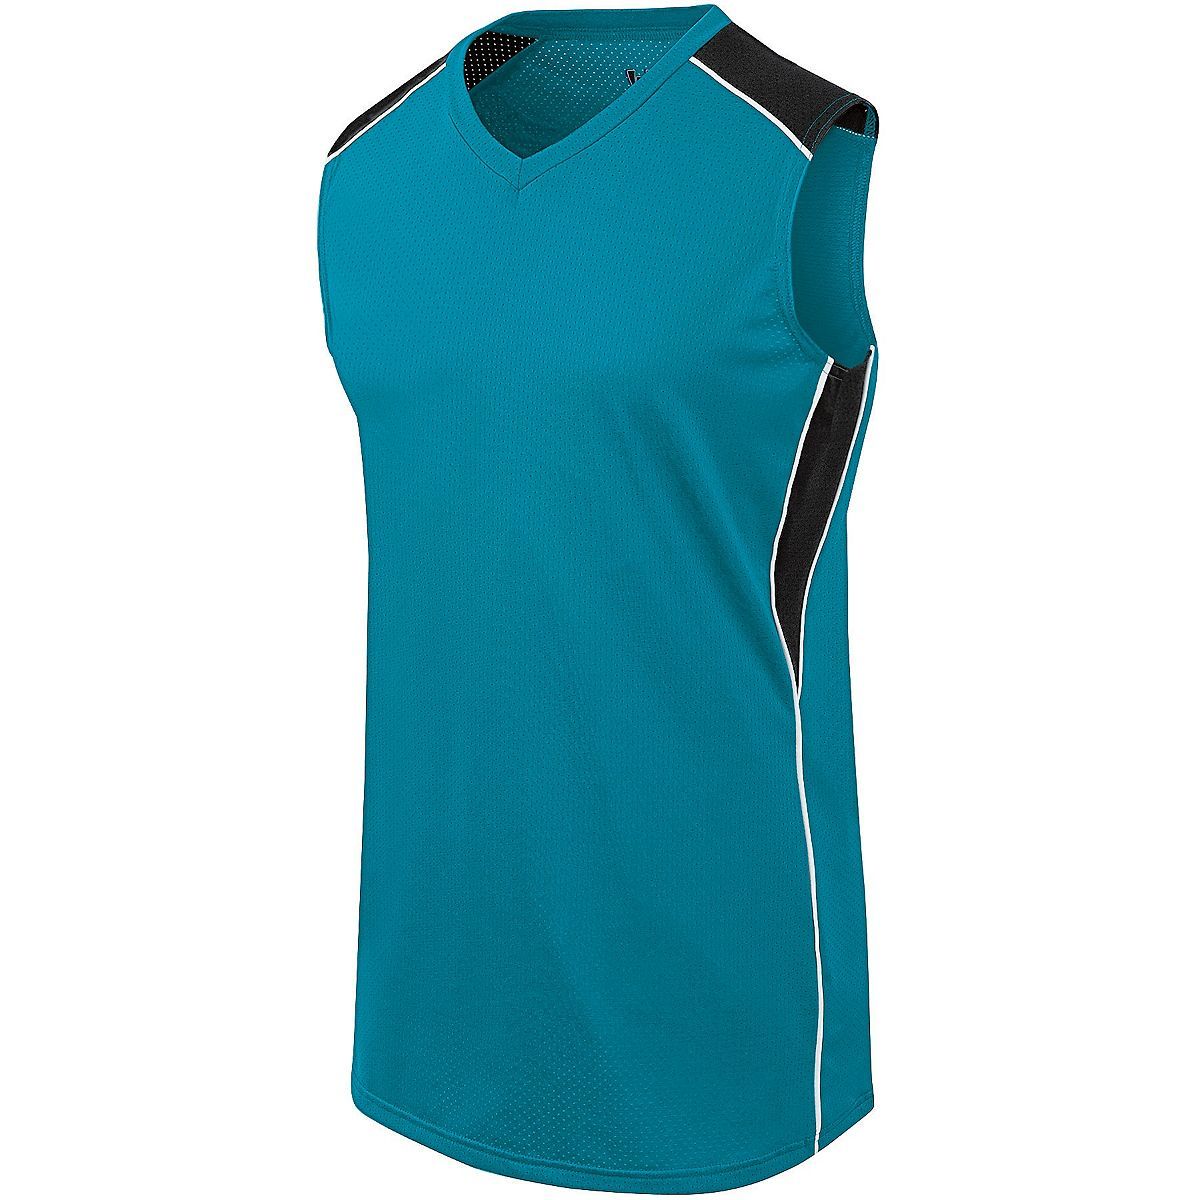 Augusta Sportswear Ladies Dynamite Jersey in Teal/Black/White  -Part of the Ladies, Ladies-Jersey, Augusta-Products, Softball, Shirts product lines at KanaleyCreations.com